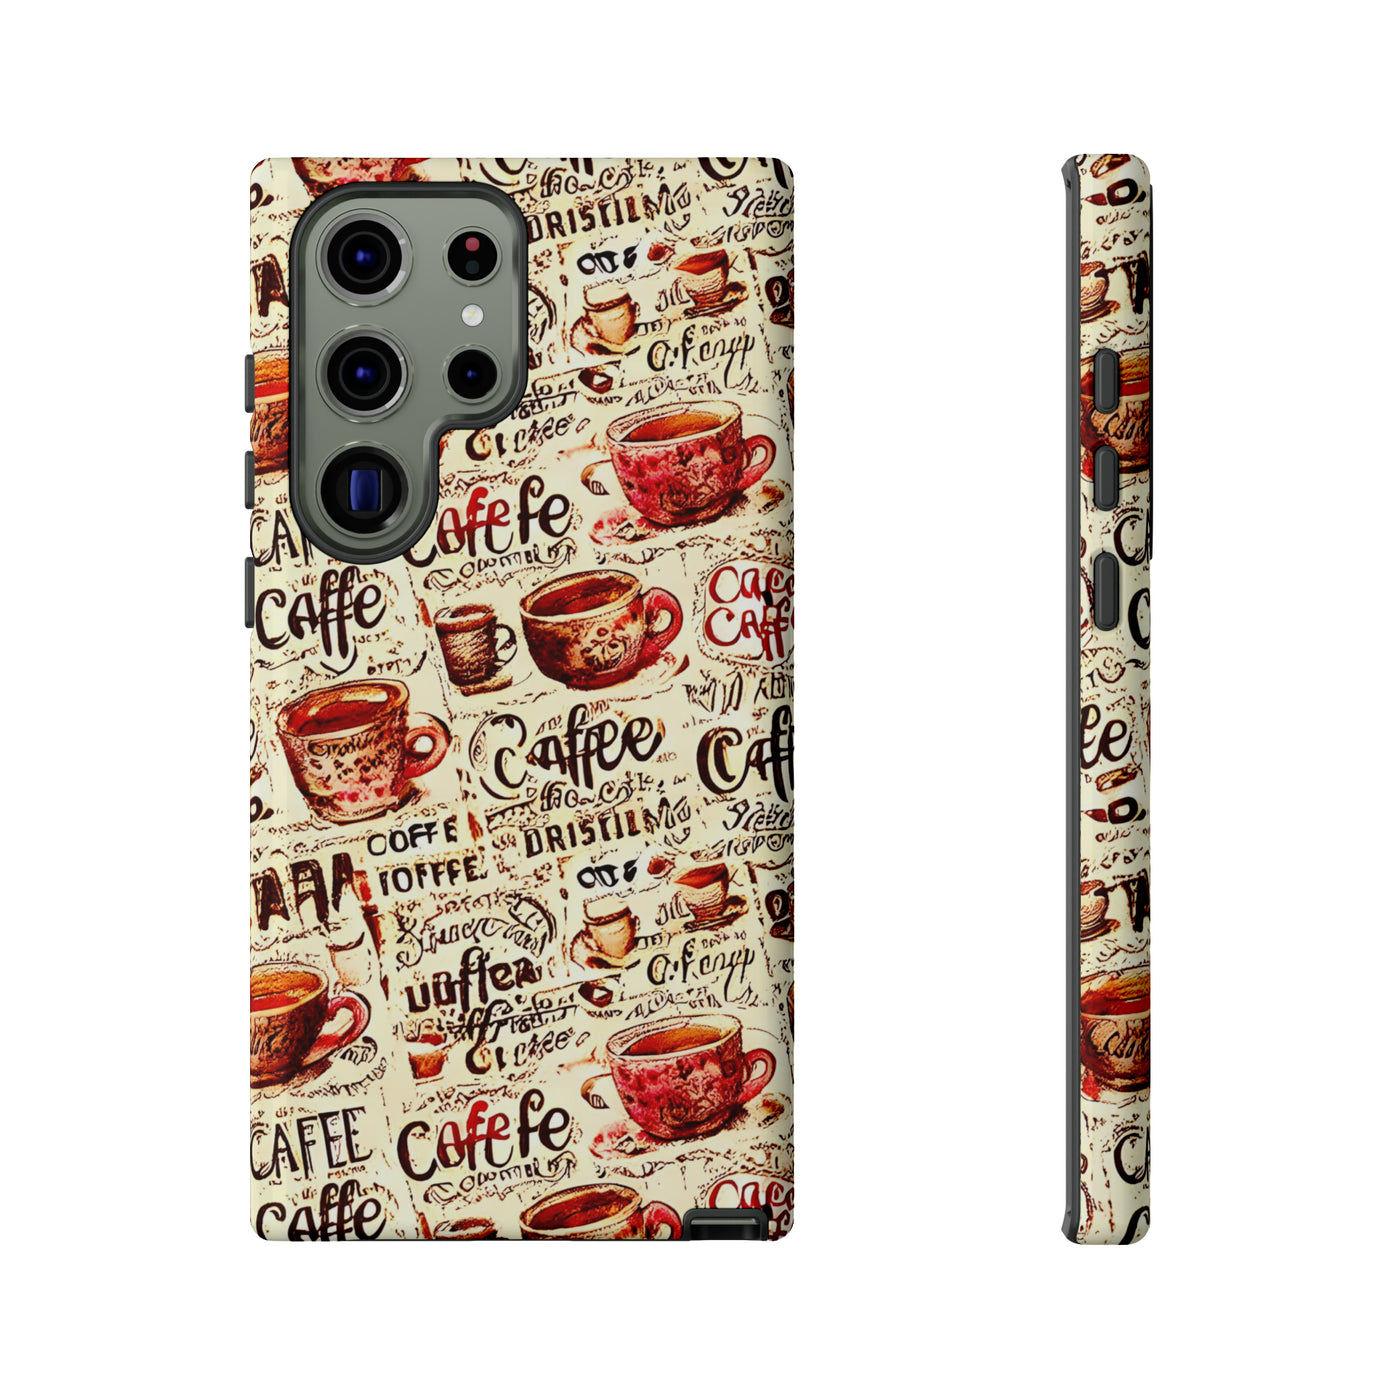 Cute Samsung Phone Case | Aesthetic Samsung Phone Case | Galaxy S23, S22, S21, S20 | Paris Coffee Cup, Protective Phone Case